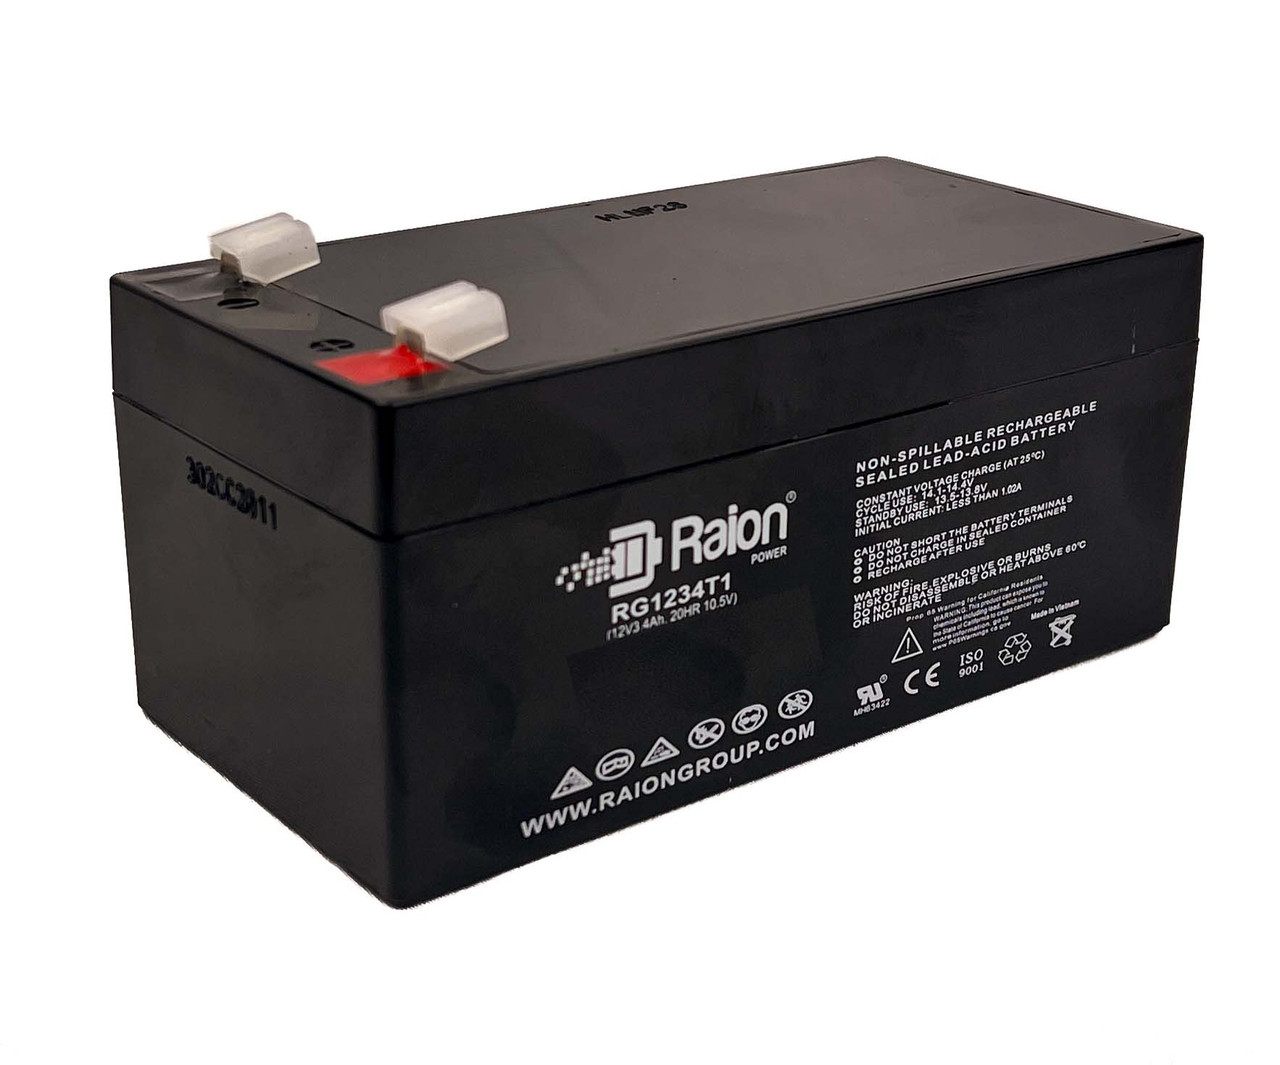 Raion Power 12V 3.4Ah Non-Spillable Replacement Battery for DataLex NP3-12